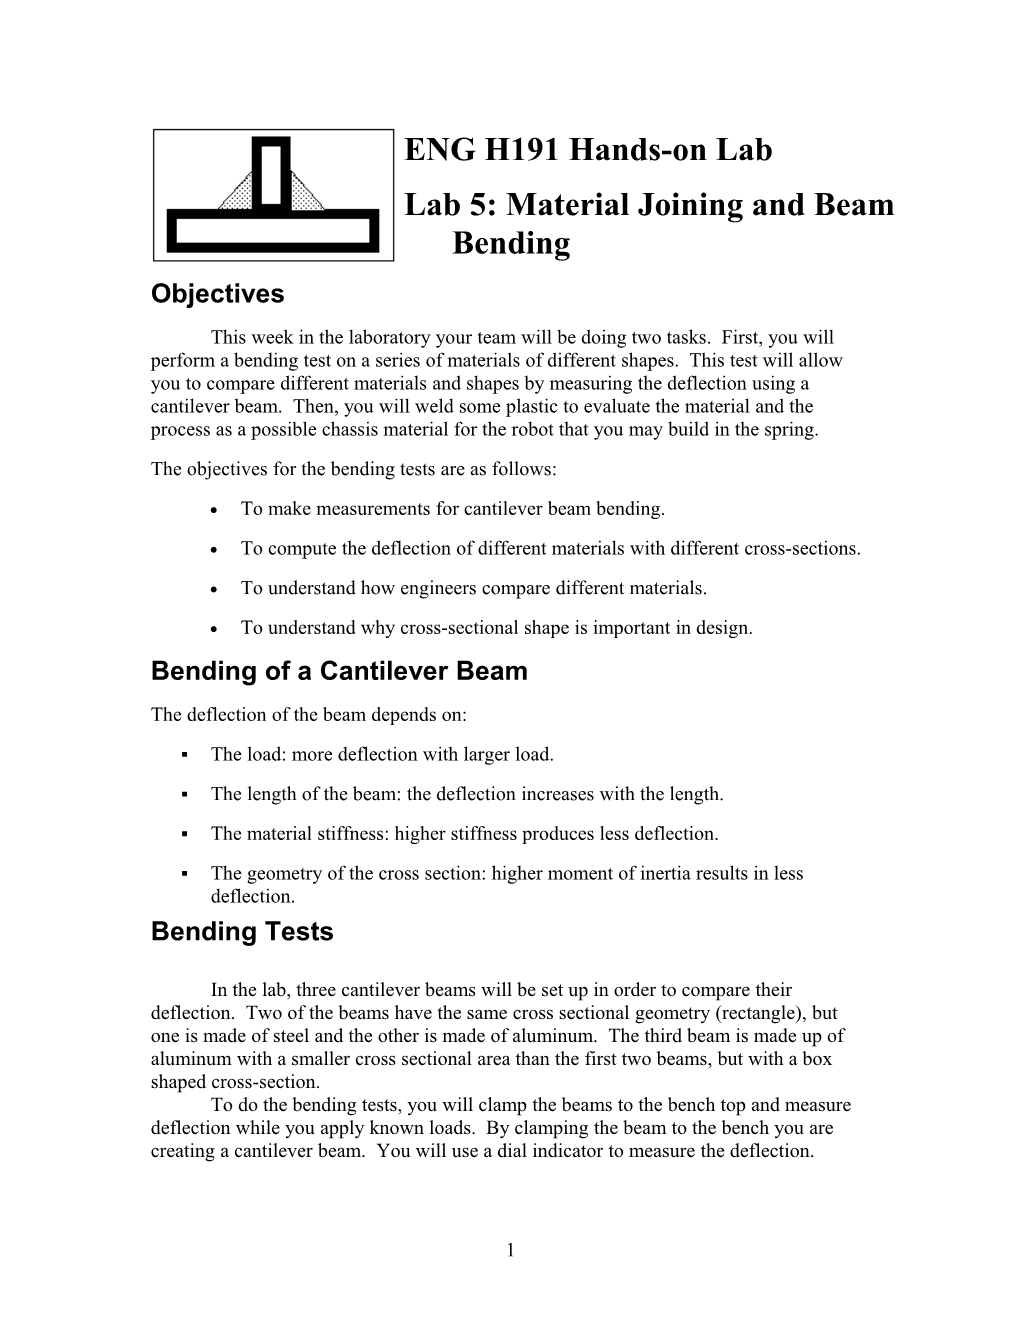 Lab 5: Material Joining and Beam Bending